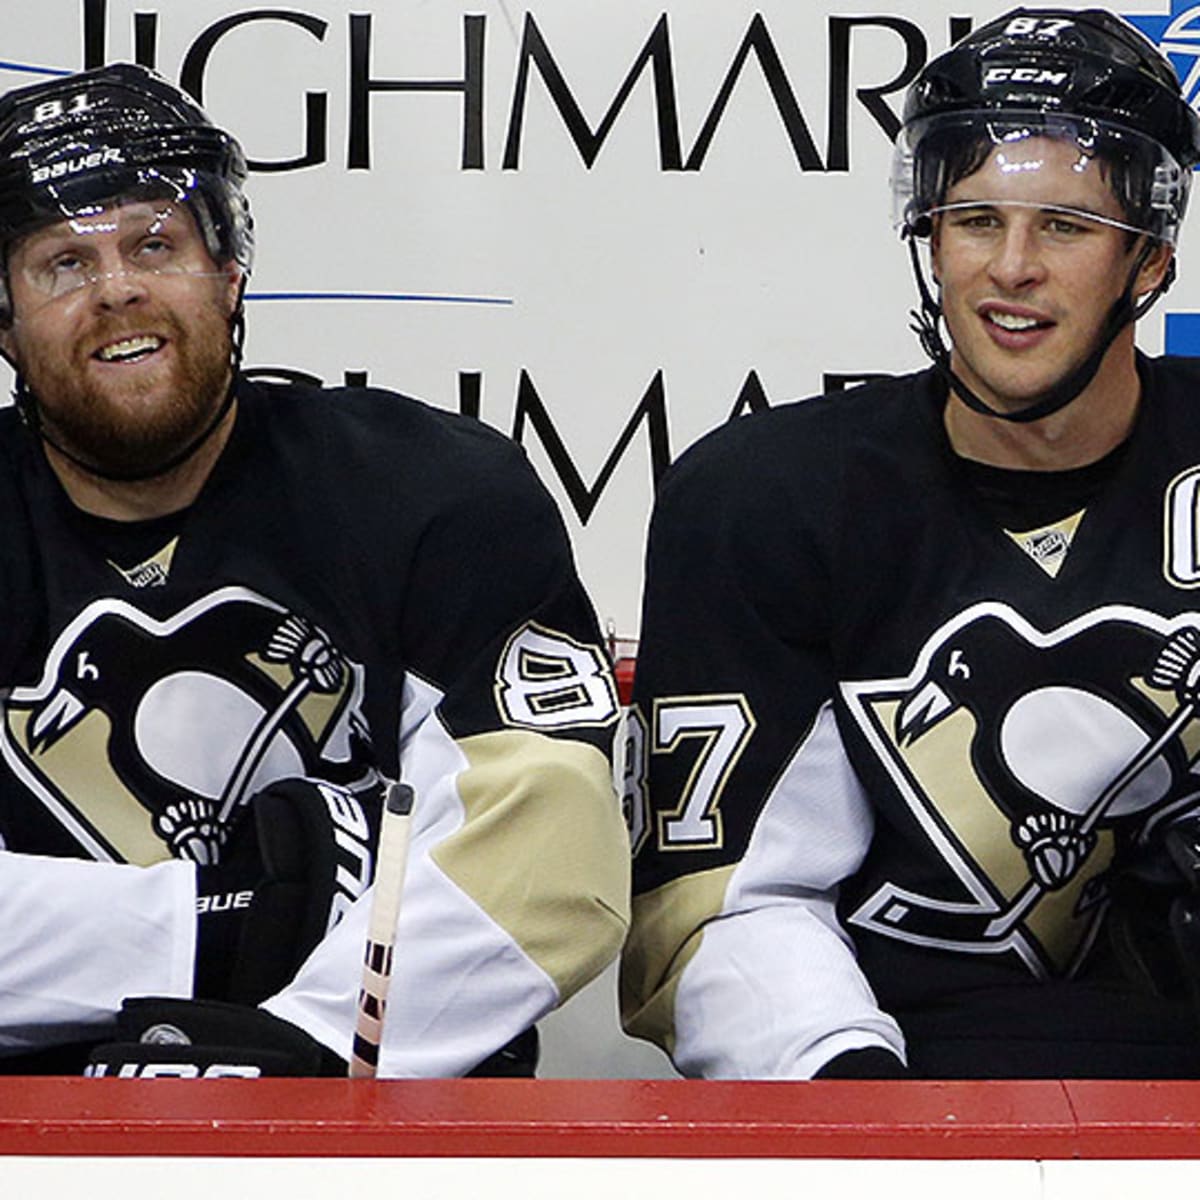 Sidney Crosby stuck in one of worst stretches of NHL career, but it's not Phil  Kessel's fault